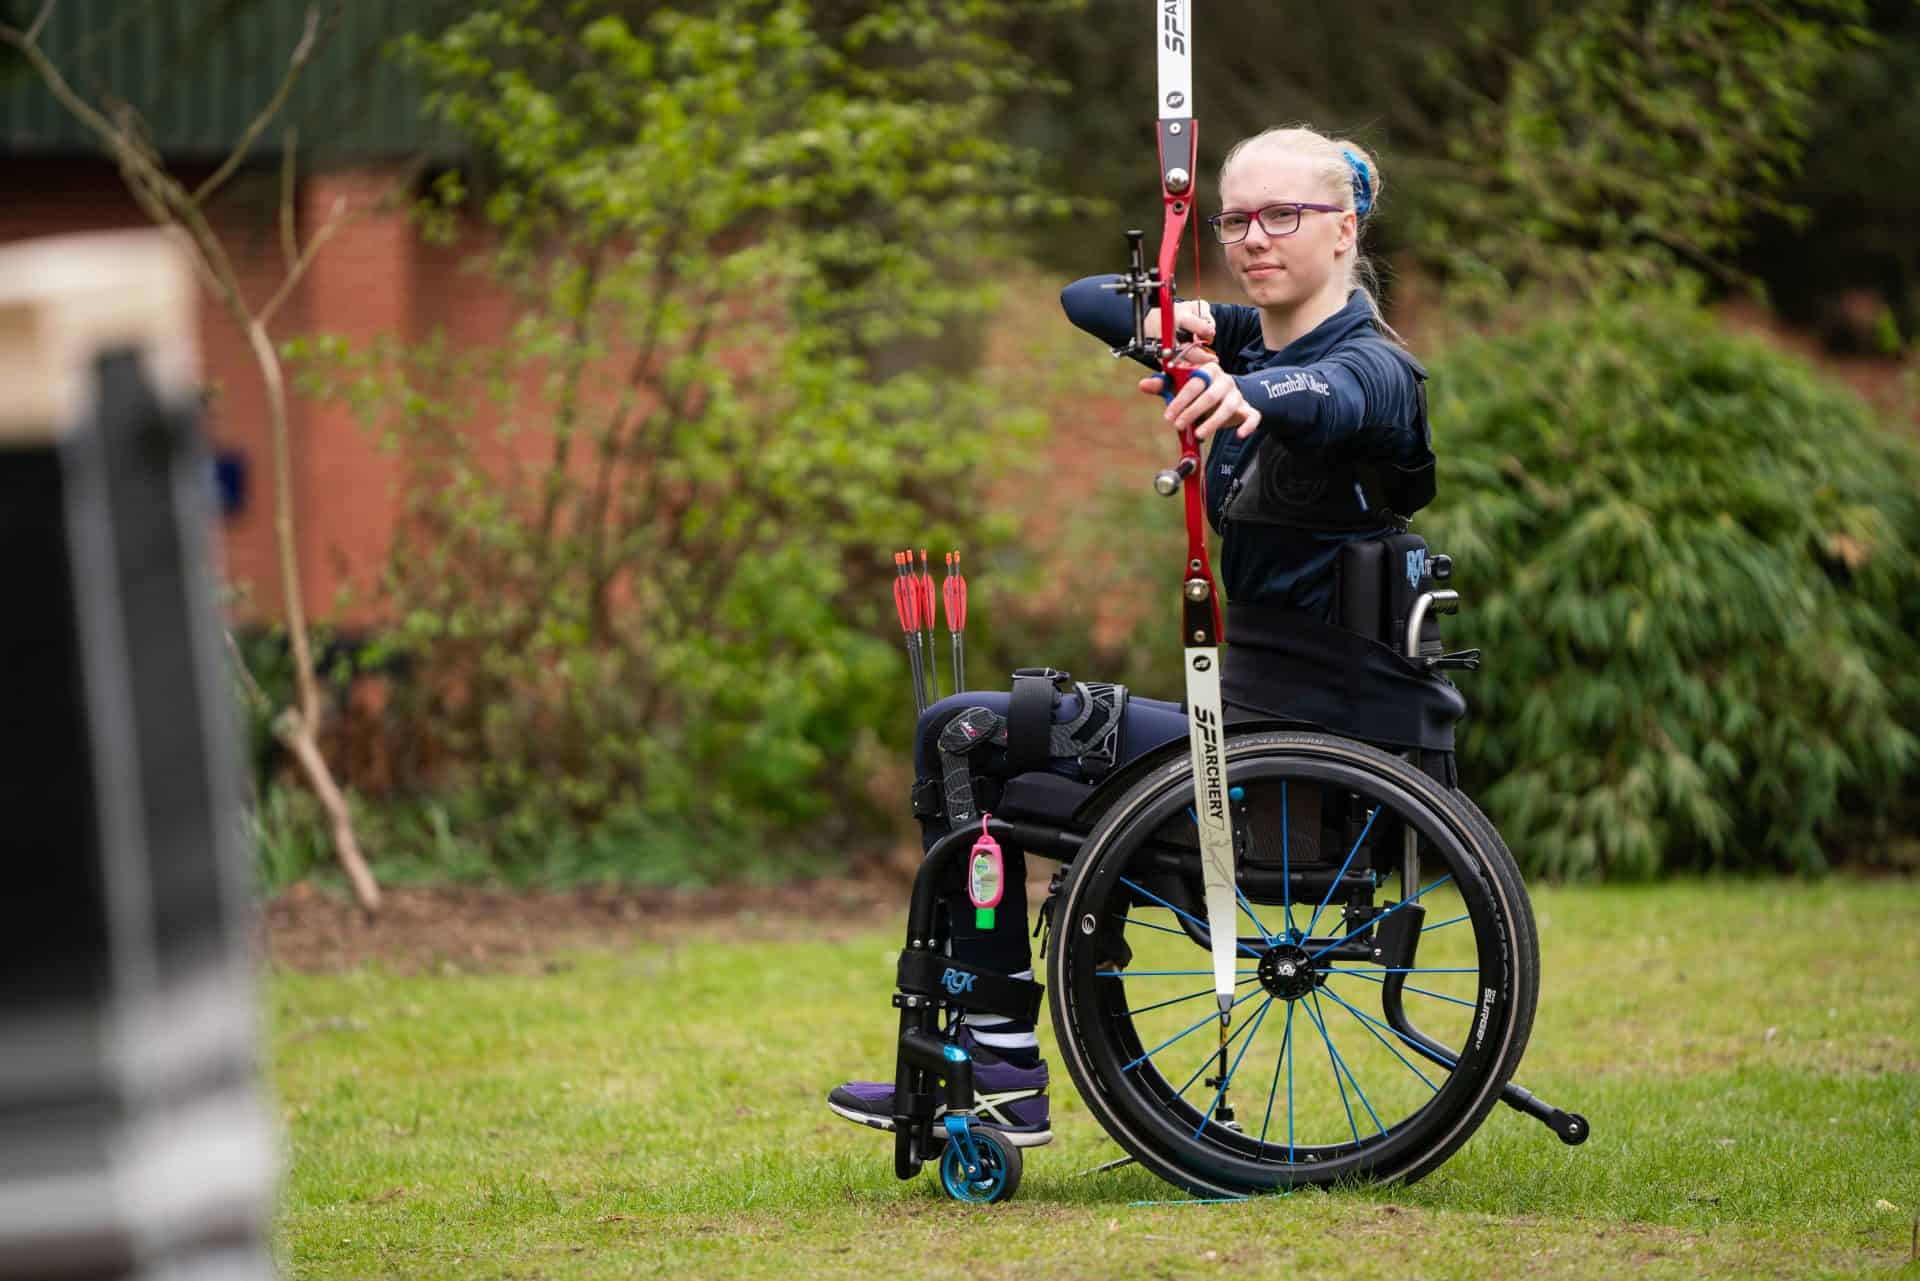 Exciting opportunity to join the board of Archery GB